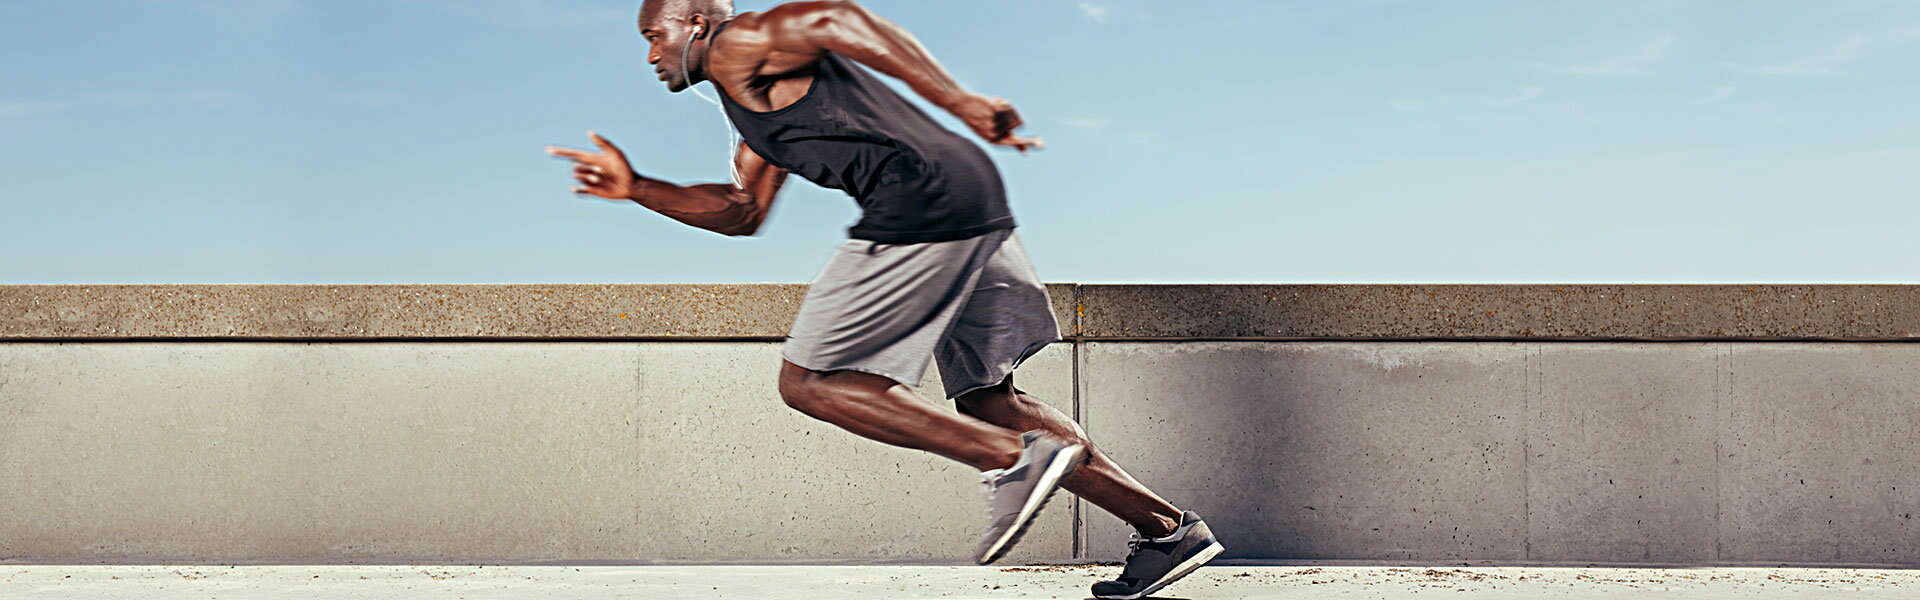 High Intensity Interval Training HIIT